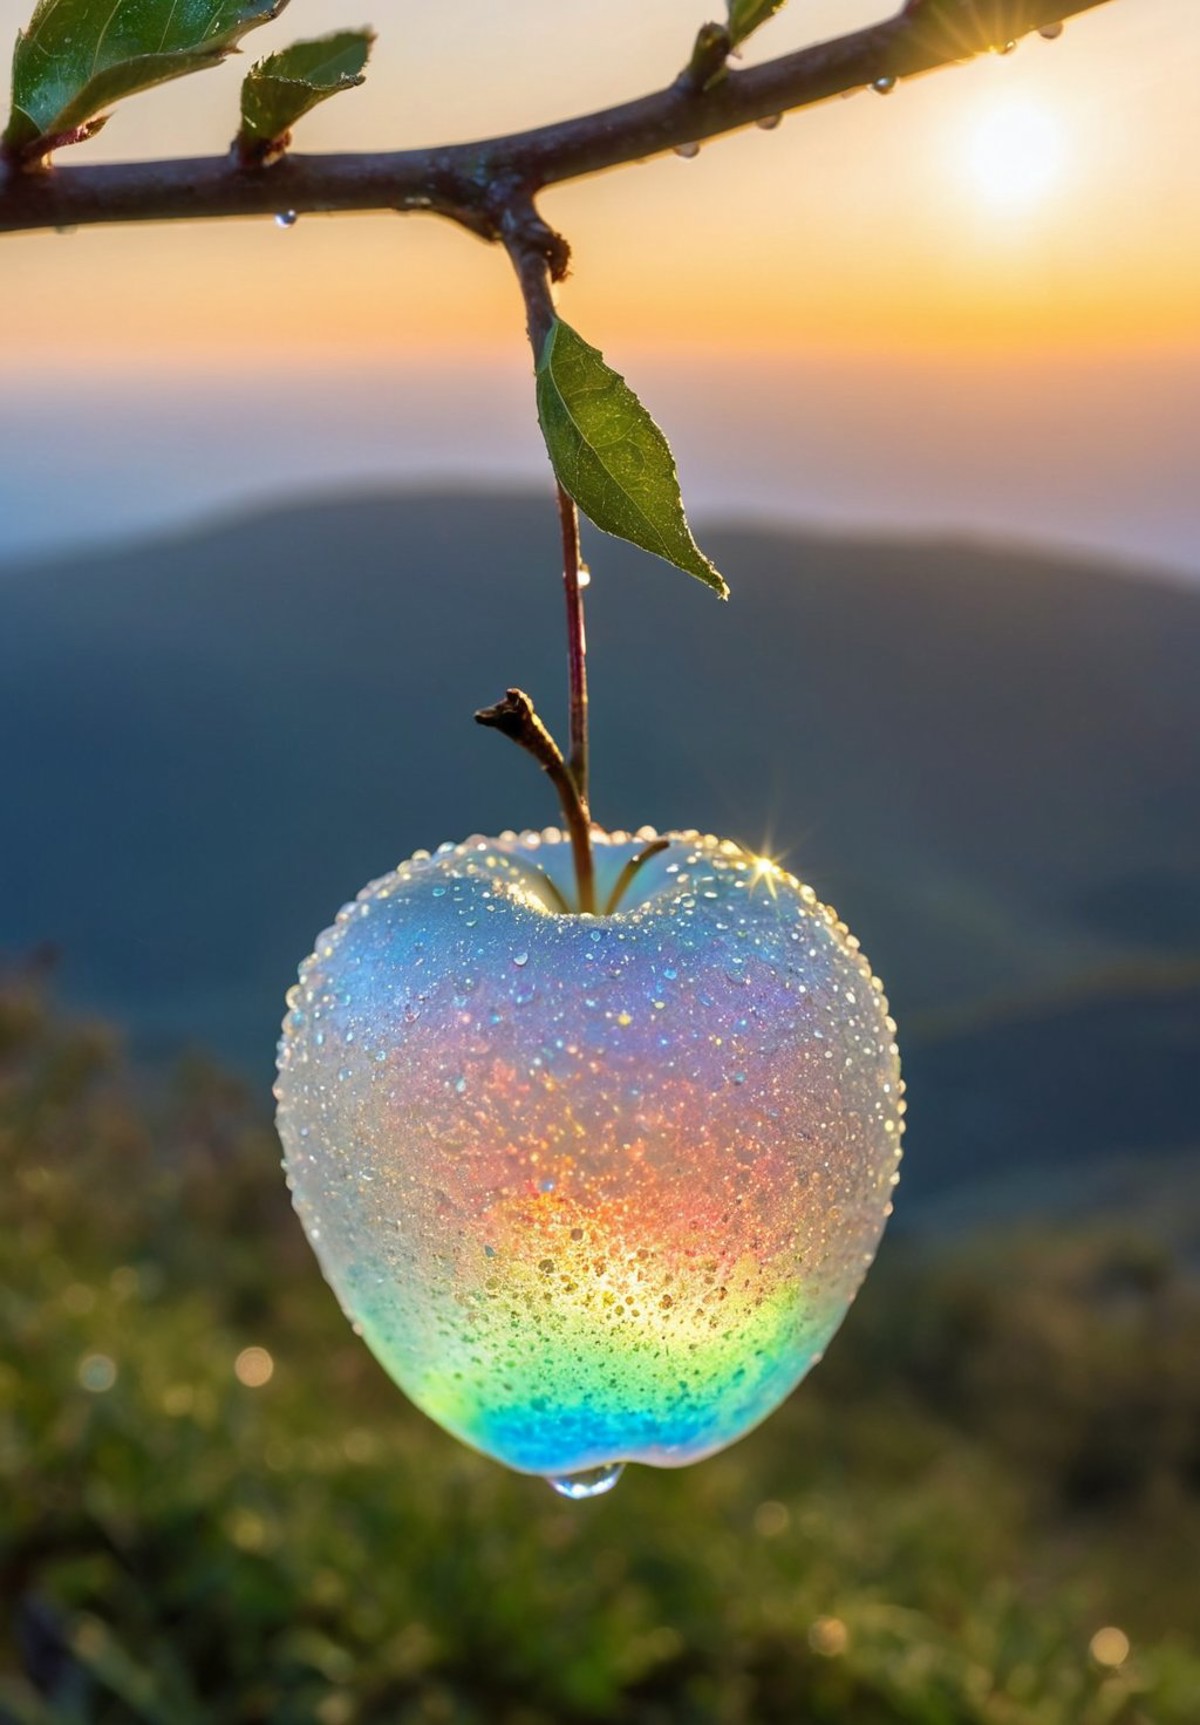 a delicate apple made of opal hung on branch  in the early morning light, adorned with glistening dewdrops. in the backgro...